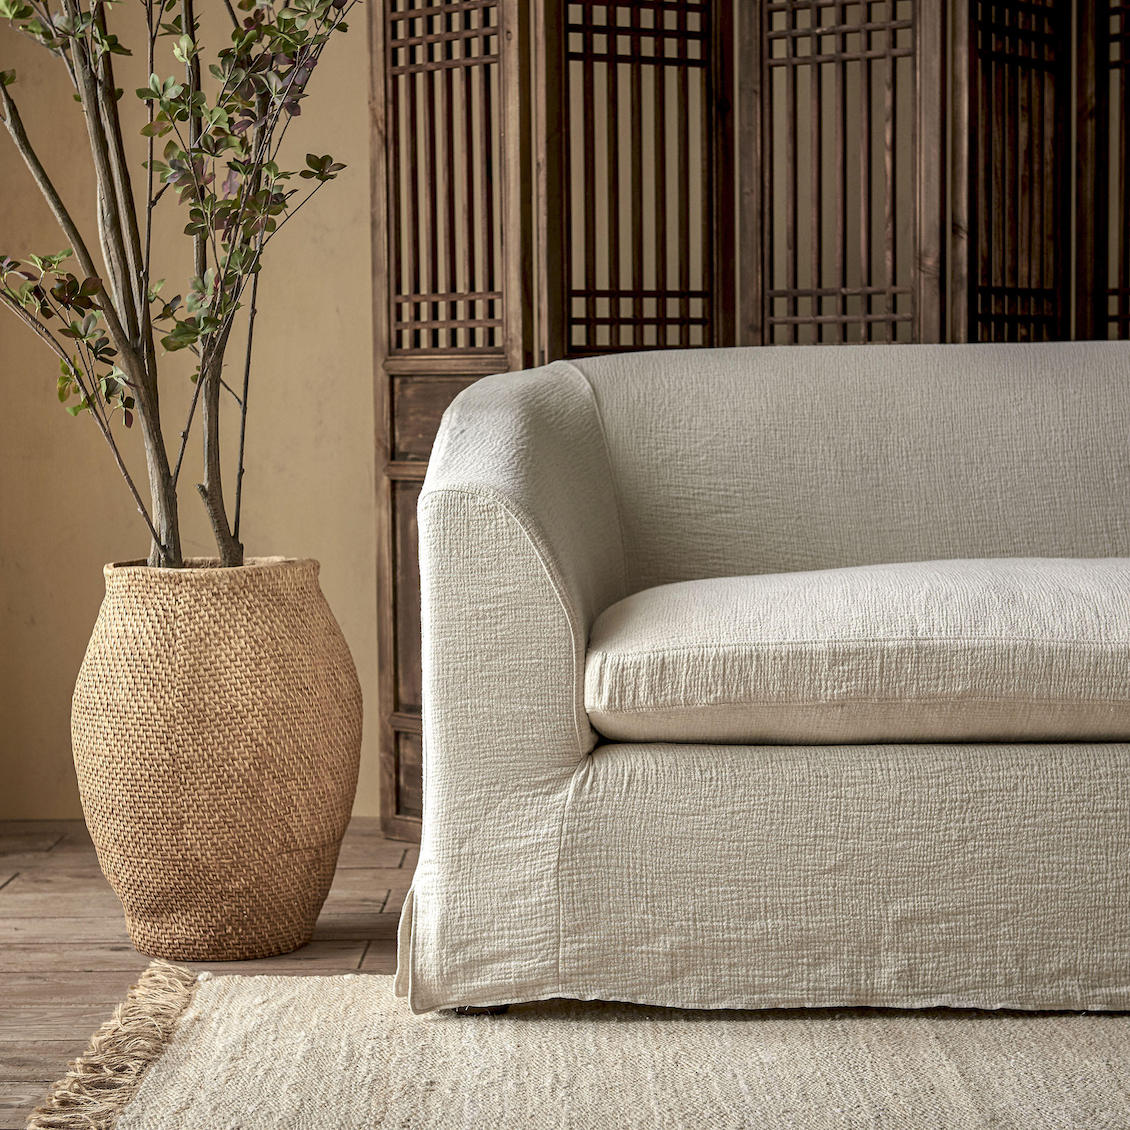 Ziki 96" Sofa in Medium Weight Linen Jasmine Rice placed in a room next to a potted tree